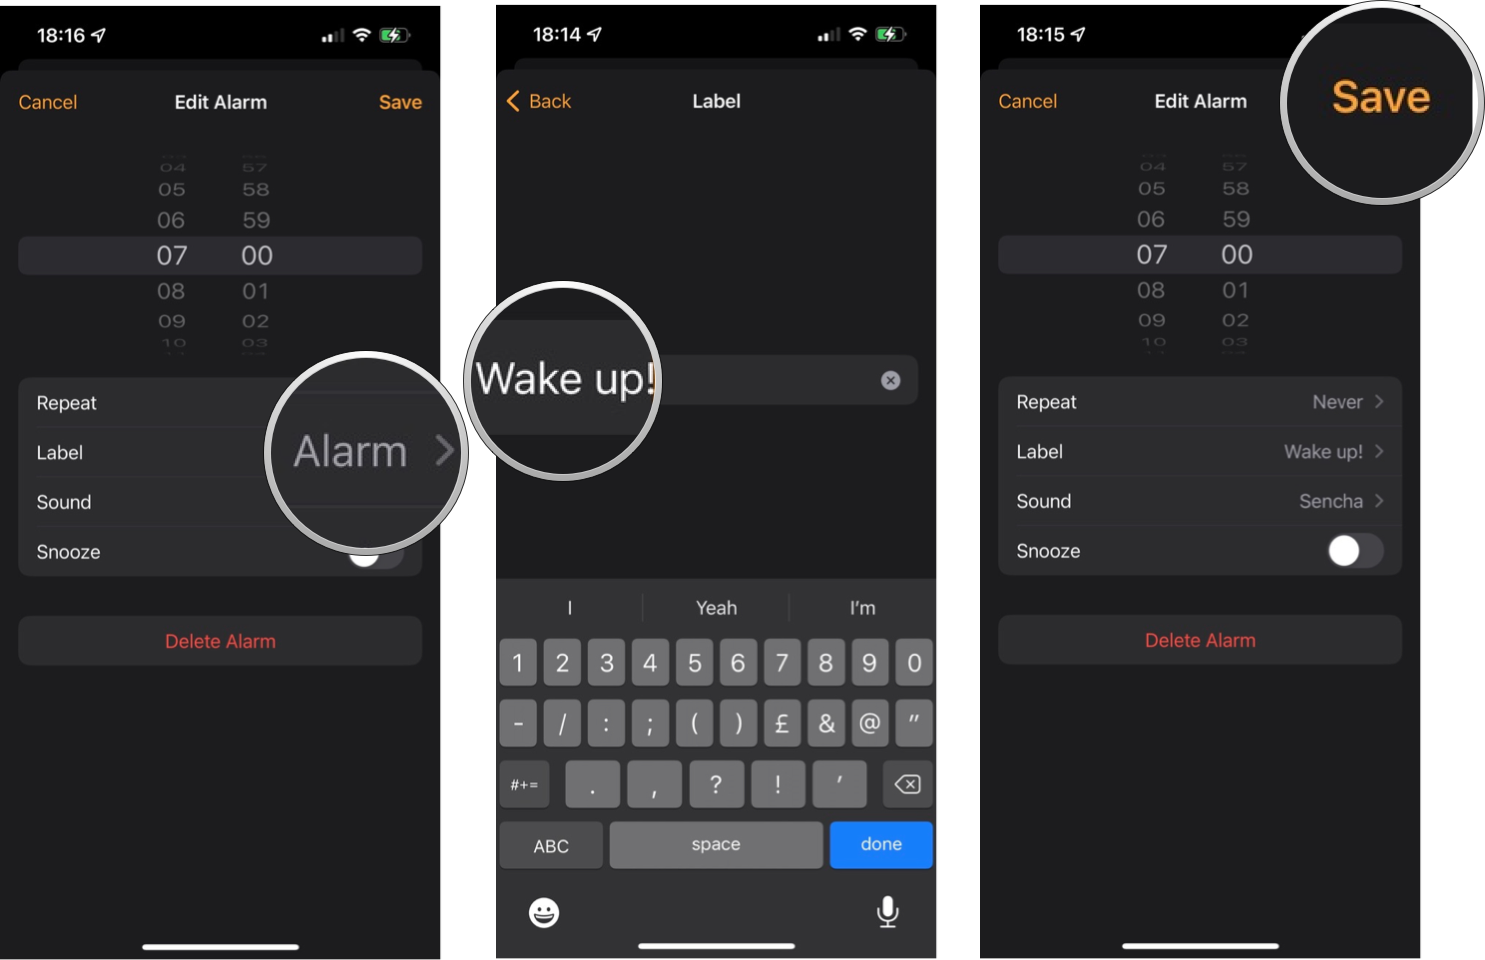 How to label an alarm by showing steps: Tap the Label button, use your keyboard to delete the defaul label and type your desired label. Tap the Done button at the button right corner of your keyboard and finally tap on Save